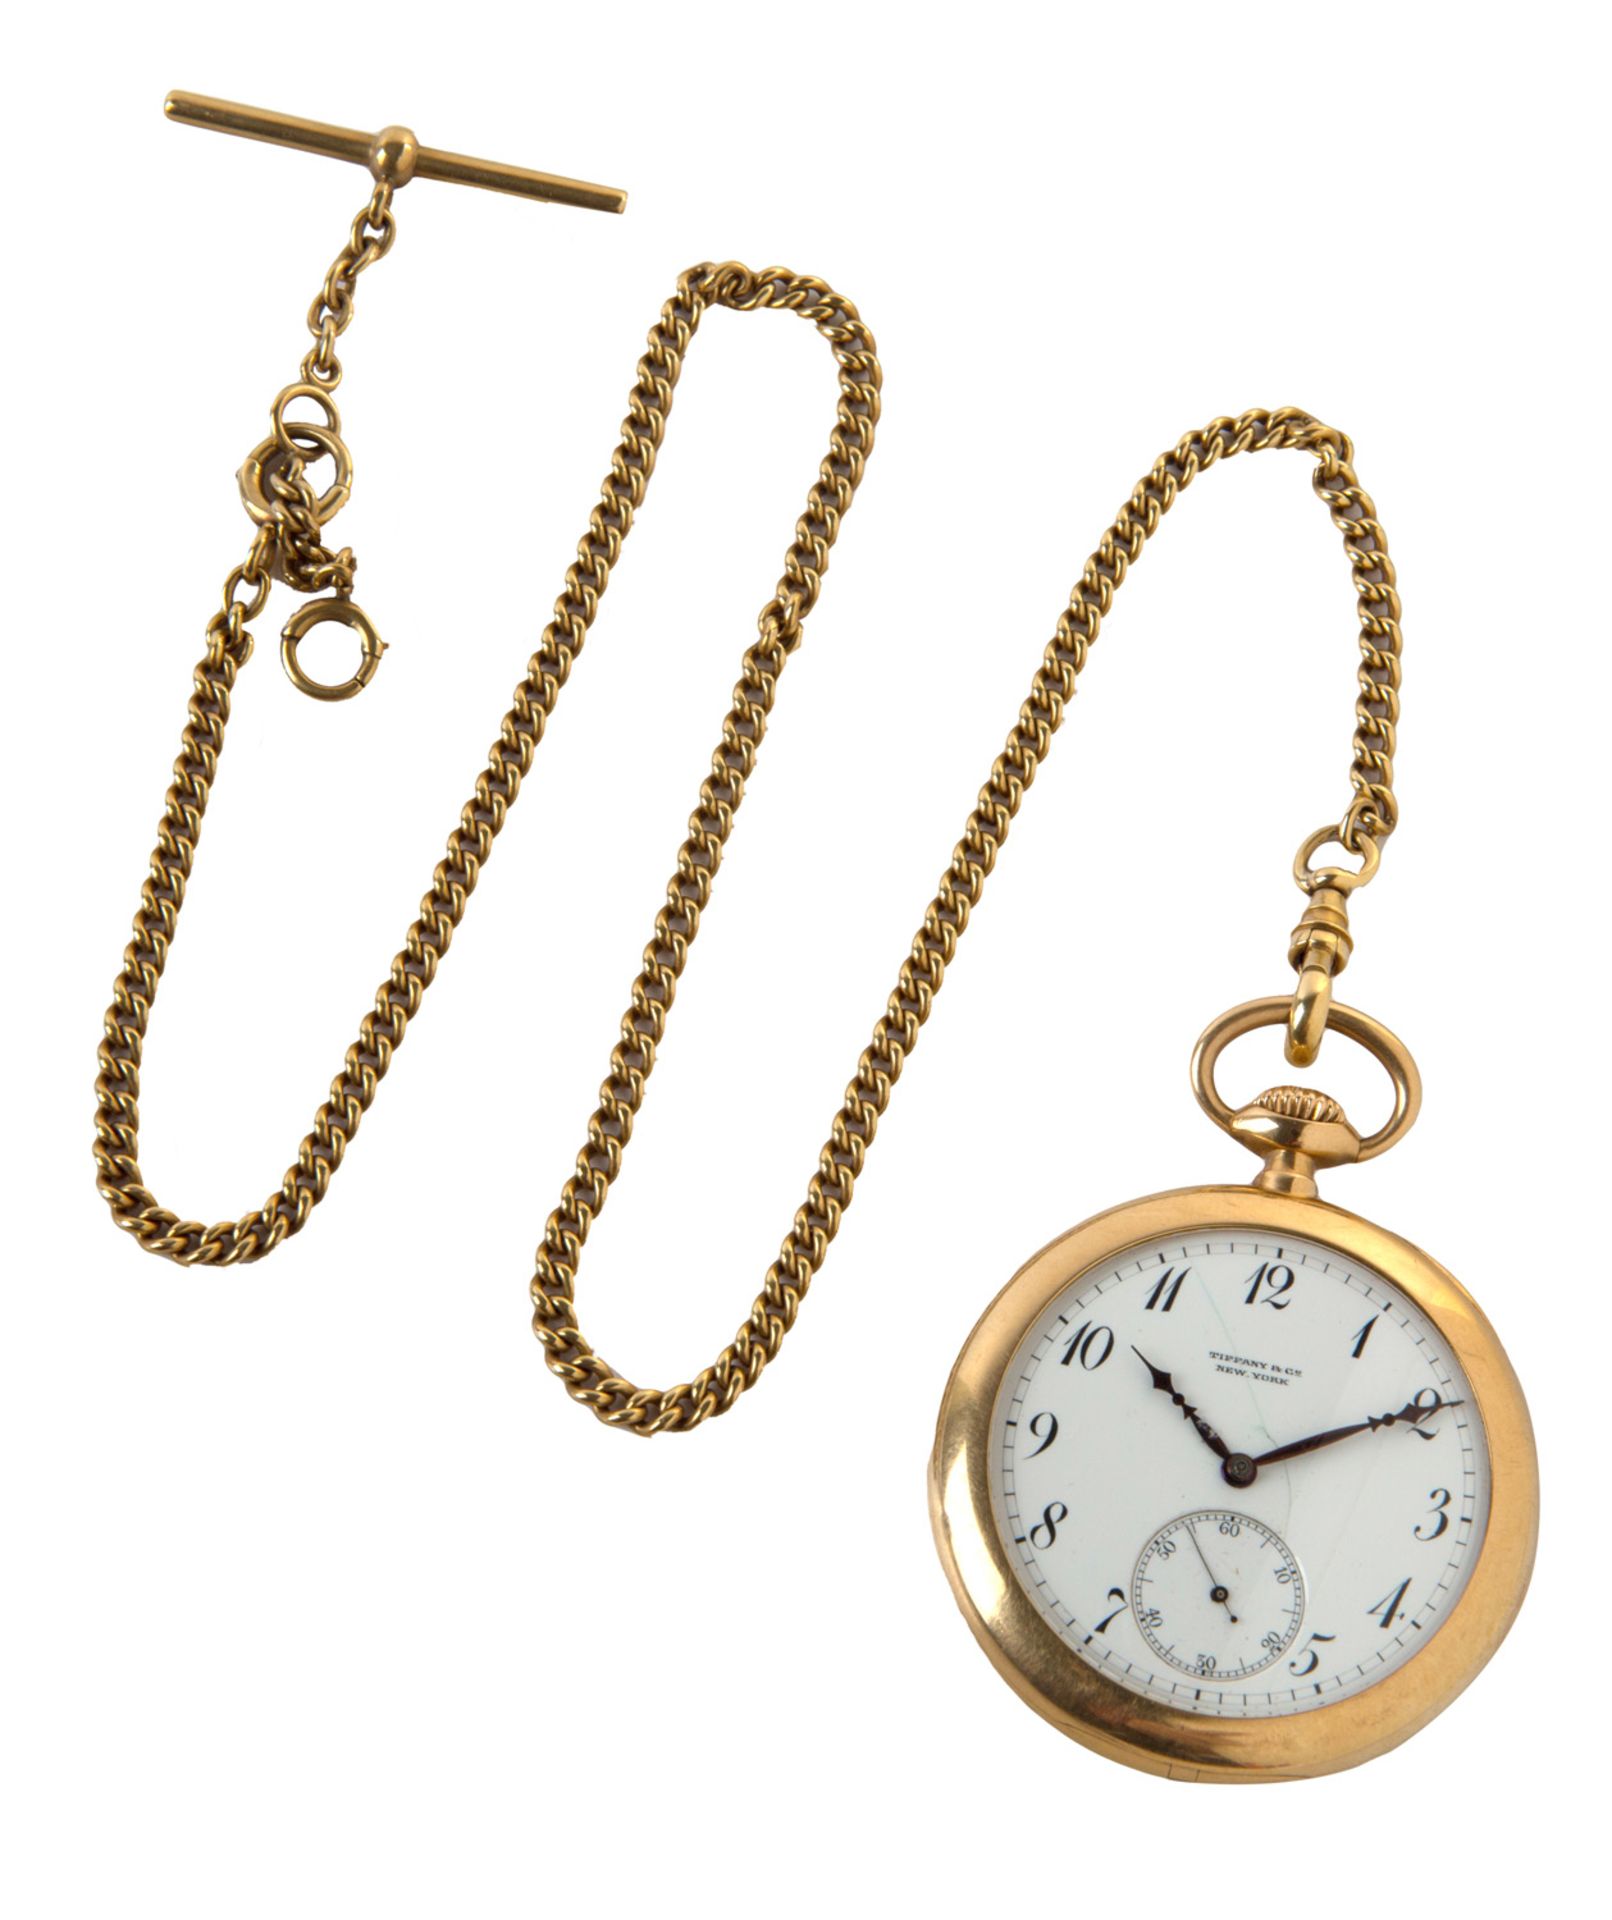 A TIFFANY & CO. 18K YELLOW GOLD POCKET WATCH WITH GOLD CHAIN, CASE NO. 19586